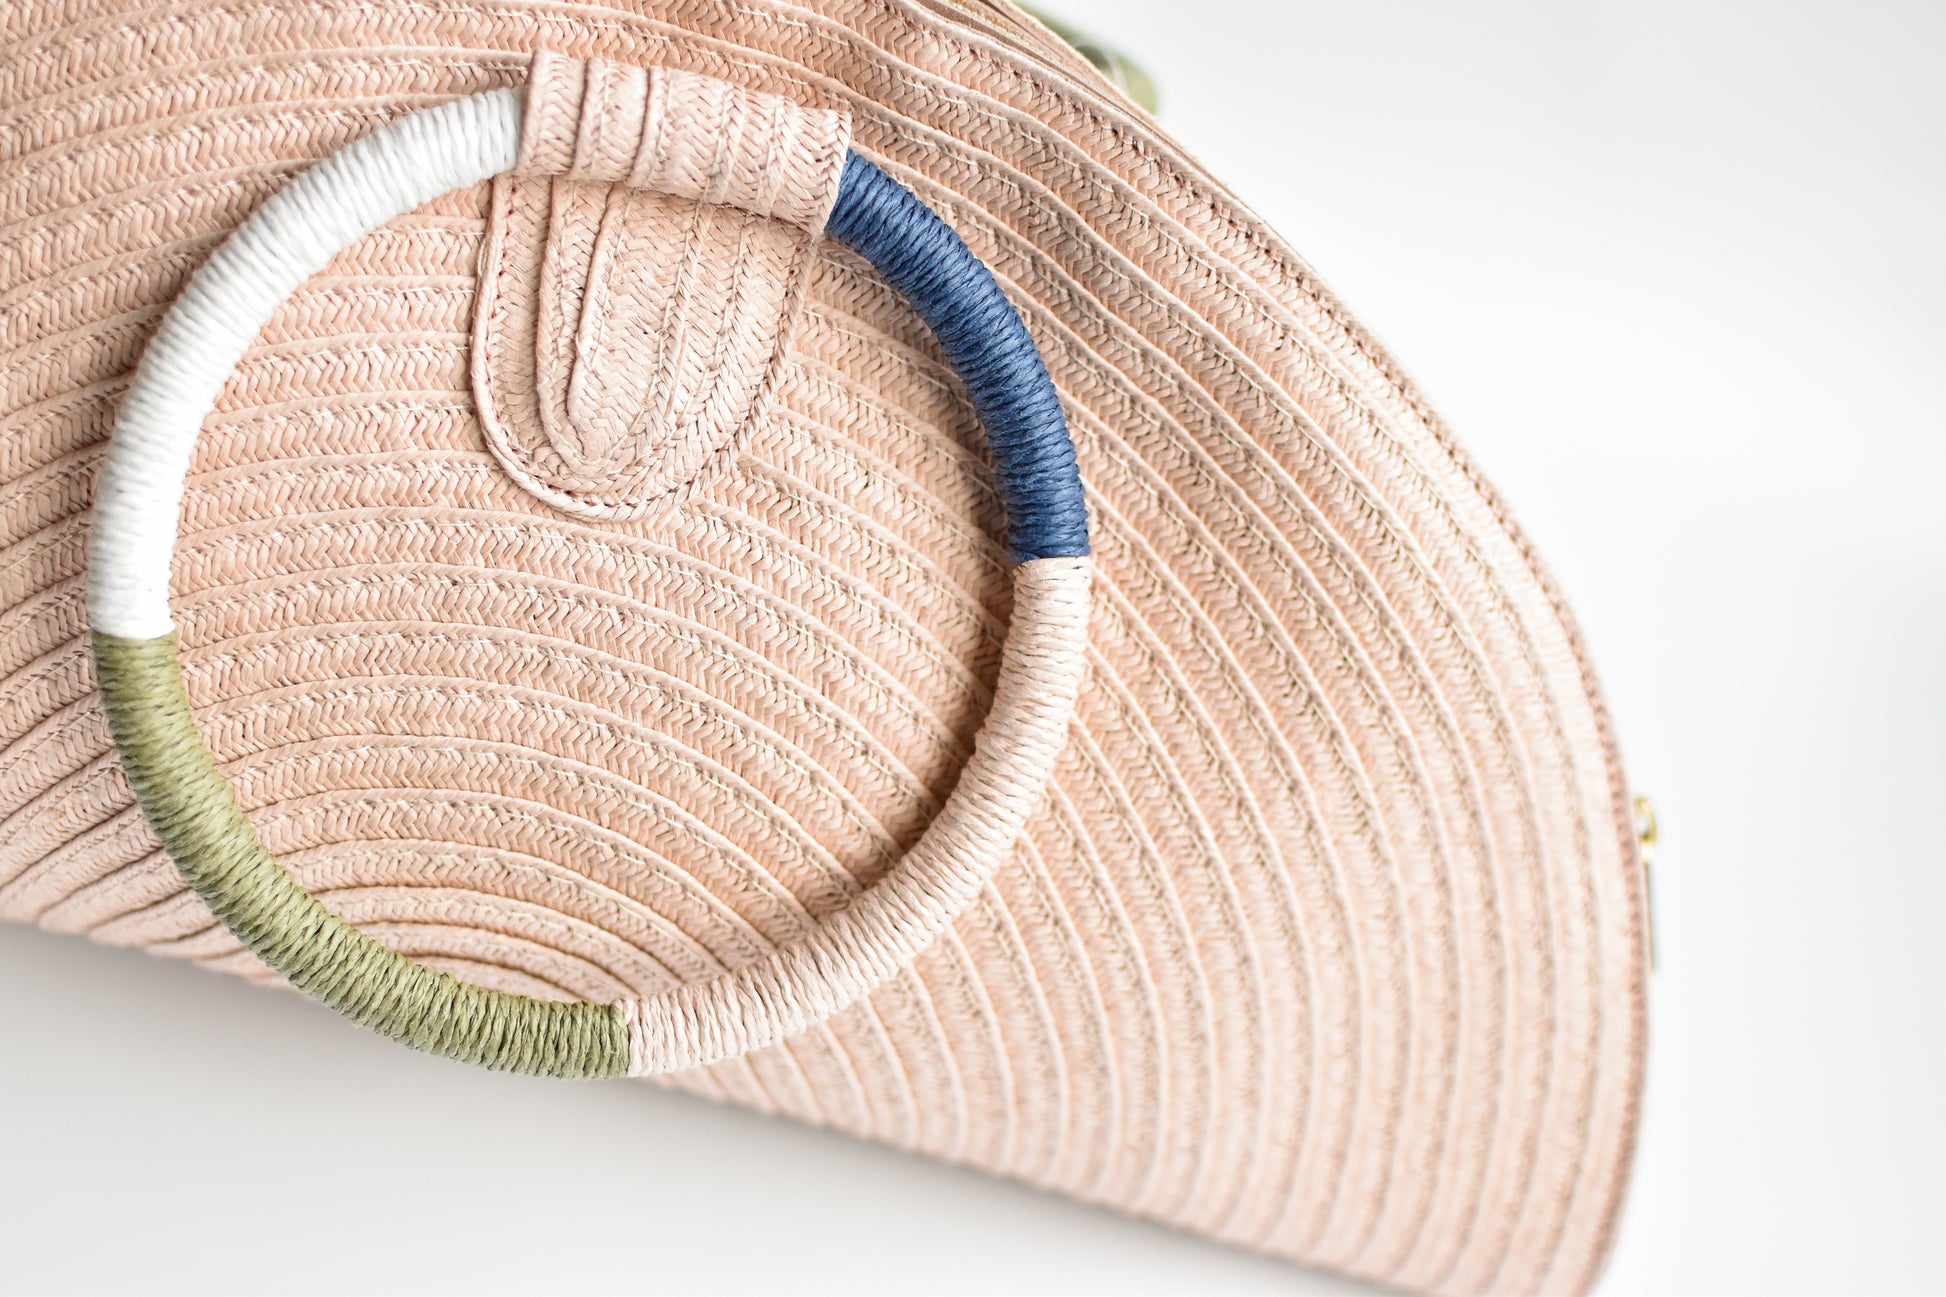 Pink half-moon straw clutch with colorful wrapped circle handle and leather sides.